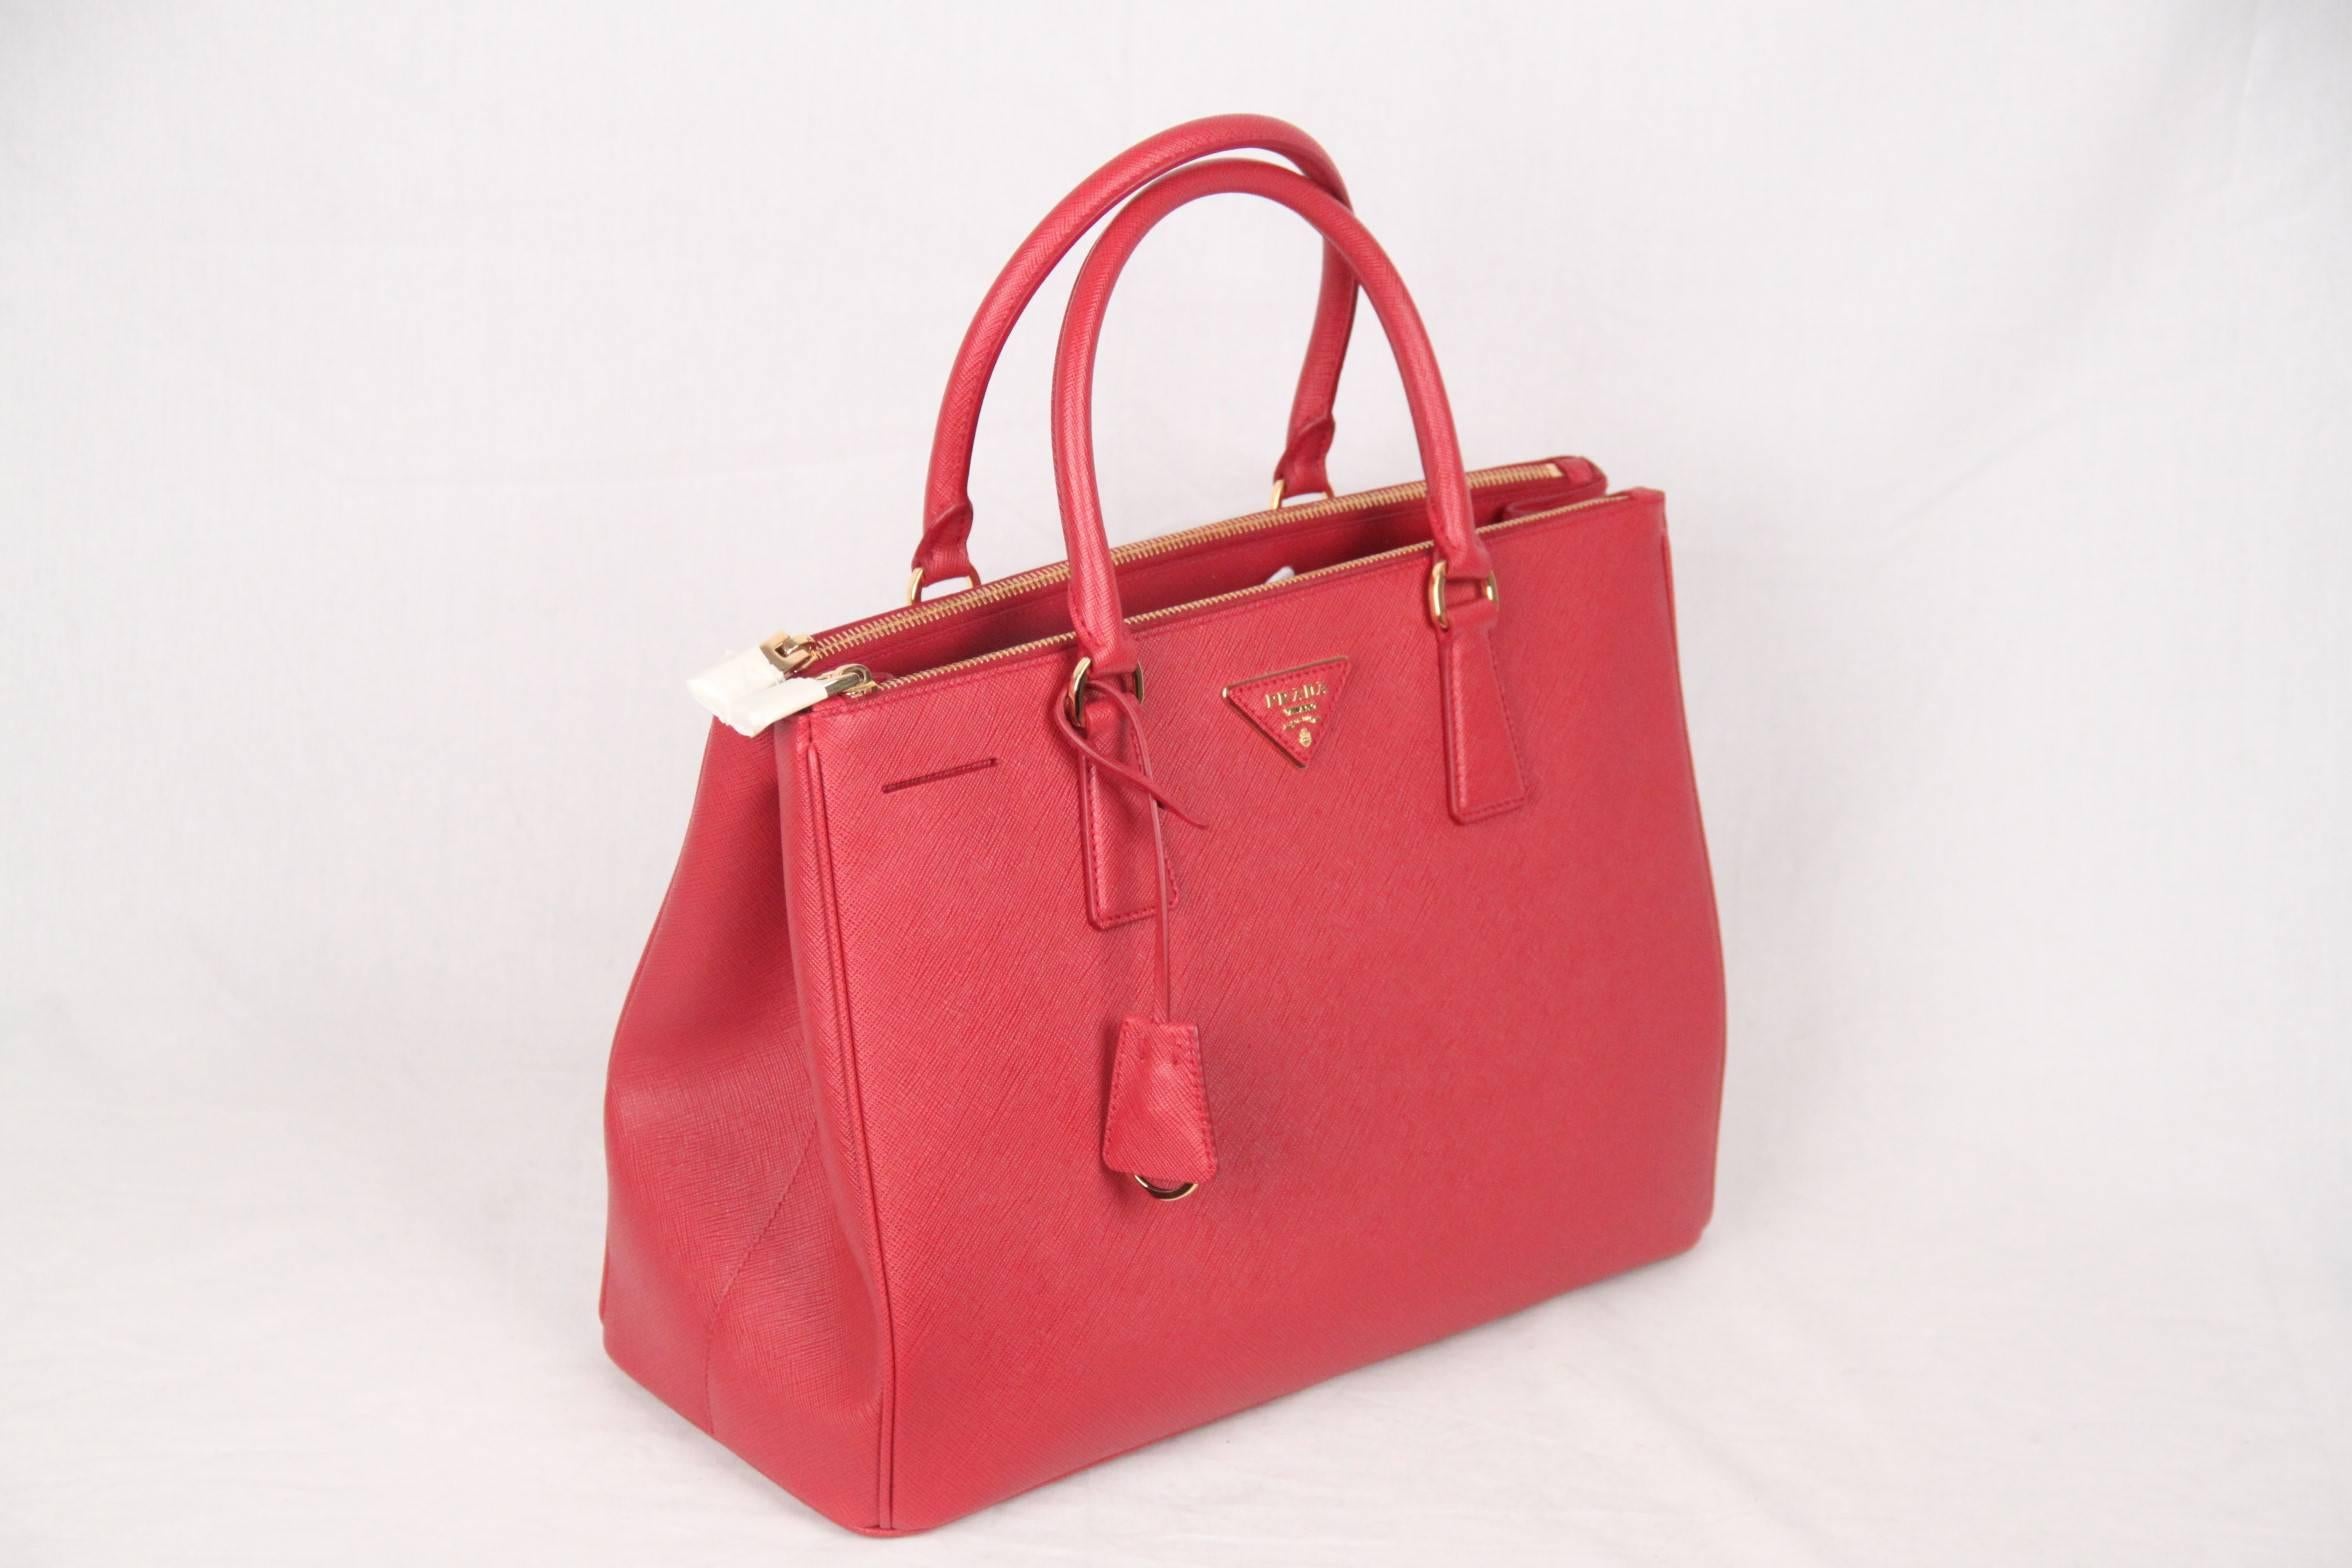 Stunning PRADA top handles bag/handbag mod. 1BA274, designed in red Saffiano Lux leather and finished with leather traingle logo on the front, all in a structured tote silhouette. It features a removable keychain with leather clochette, double round